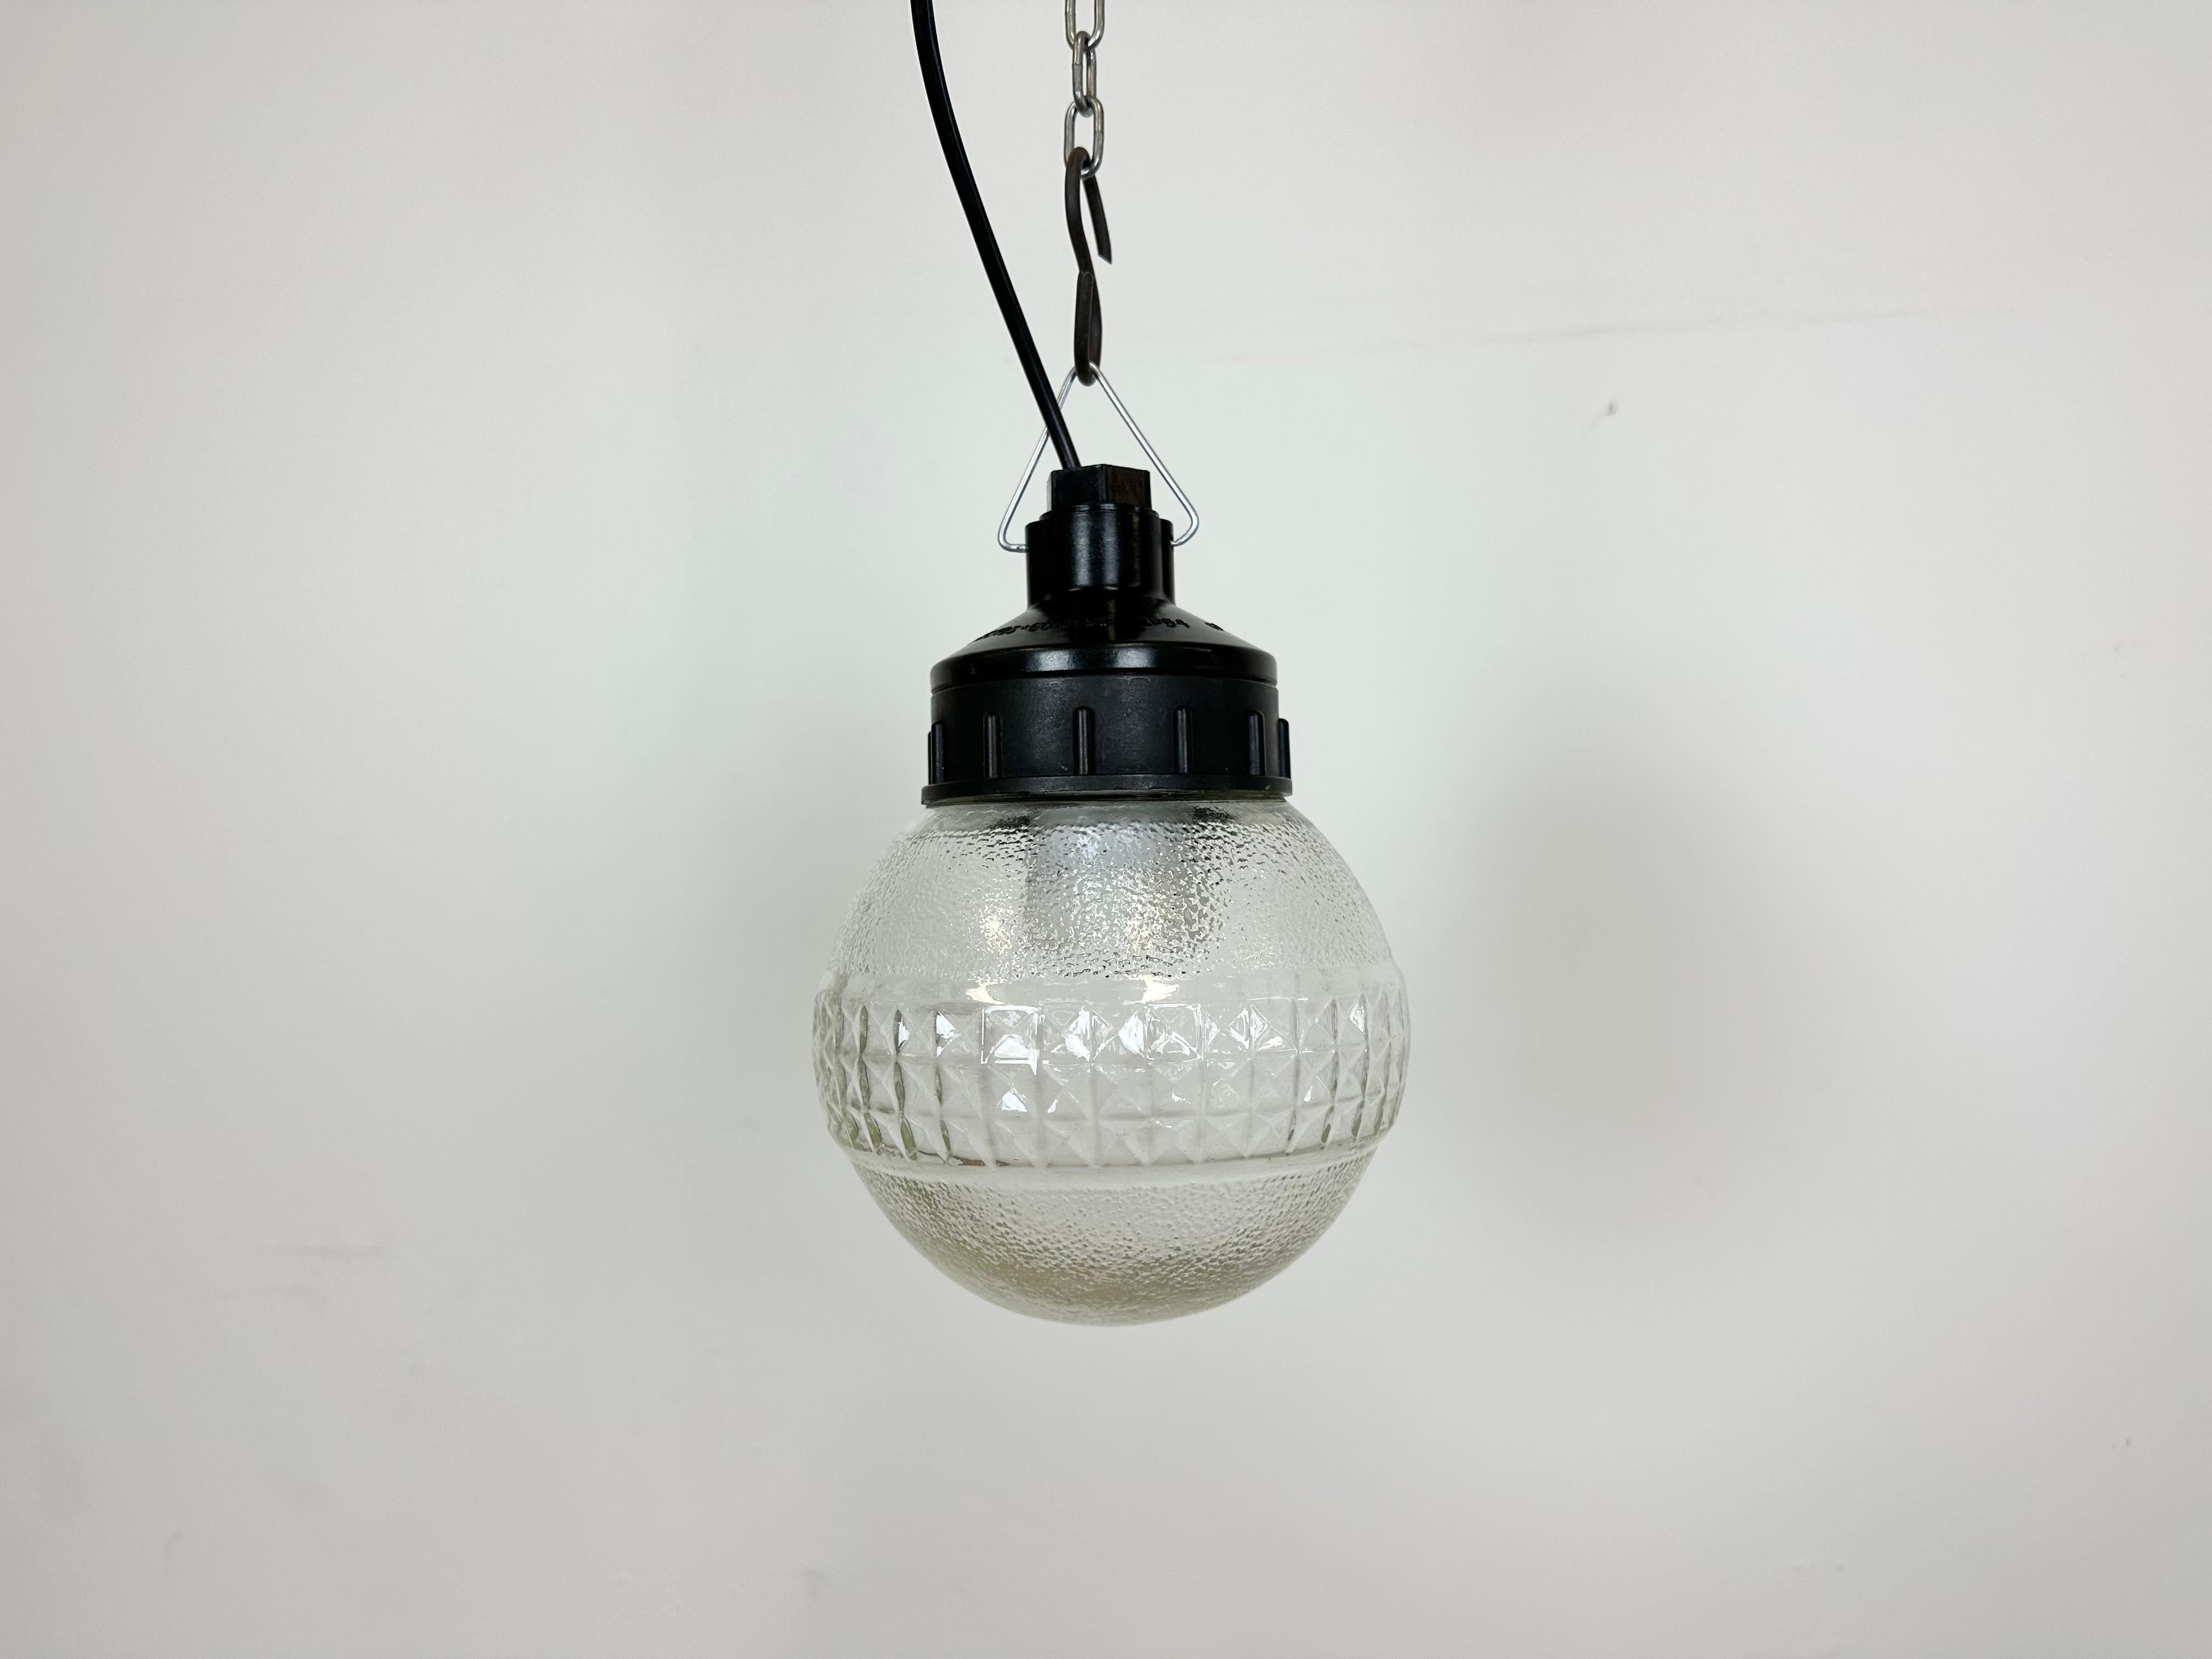 Vintage industrial light made in former Soviet Union during the 1970s. It features a brown bakelite top and a frosted glass cover. The socket requires E27/ E26 light bulbs. New wire. The weight of the lamp is 0,9 kg.